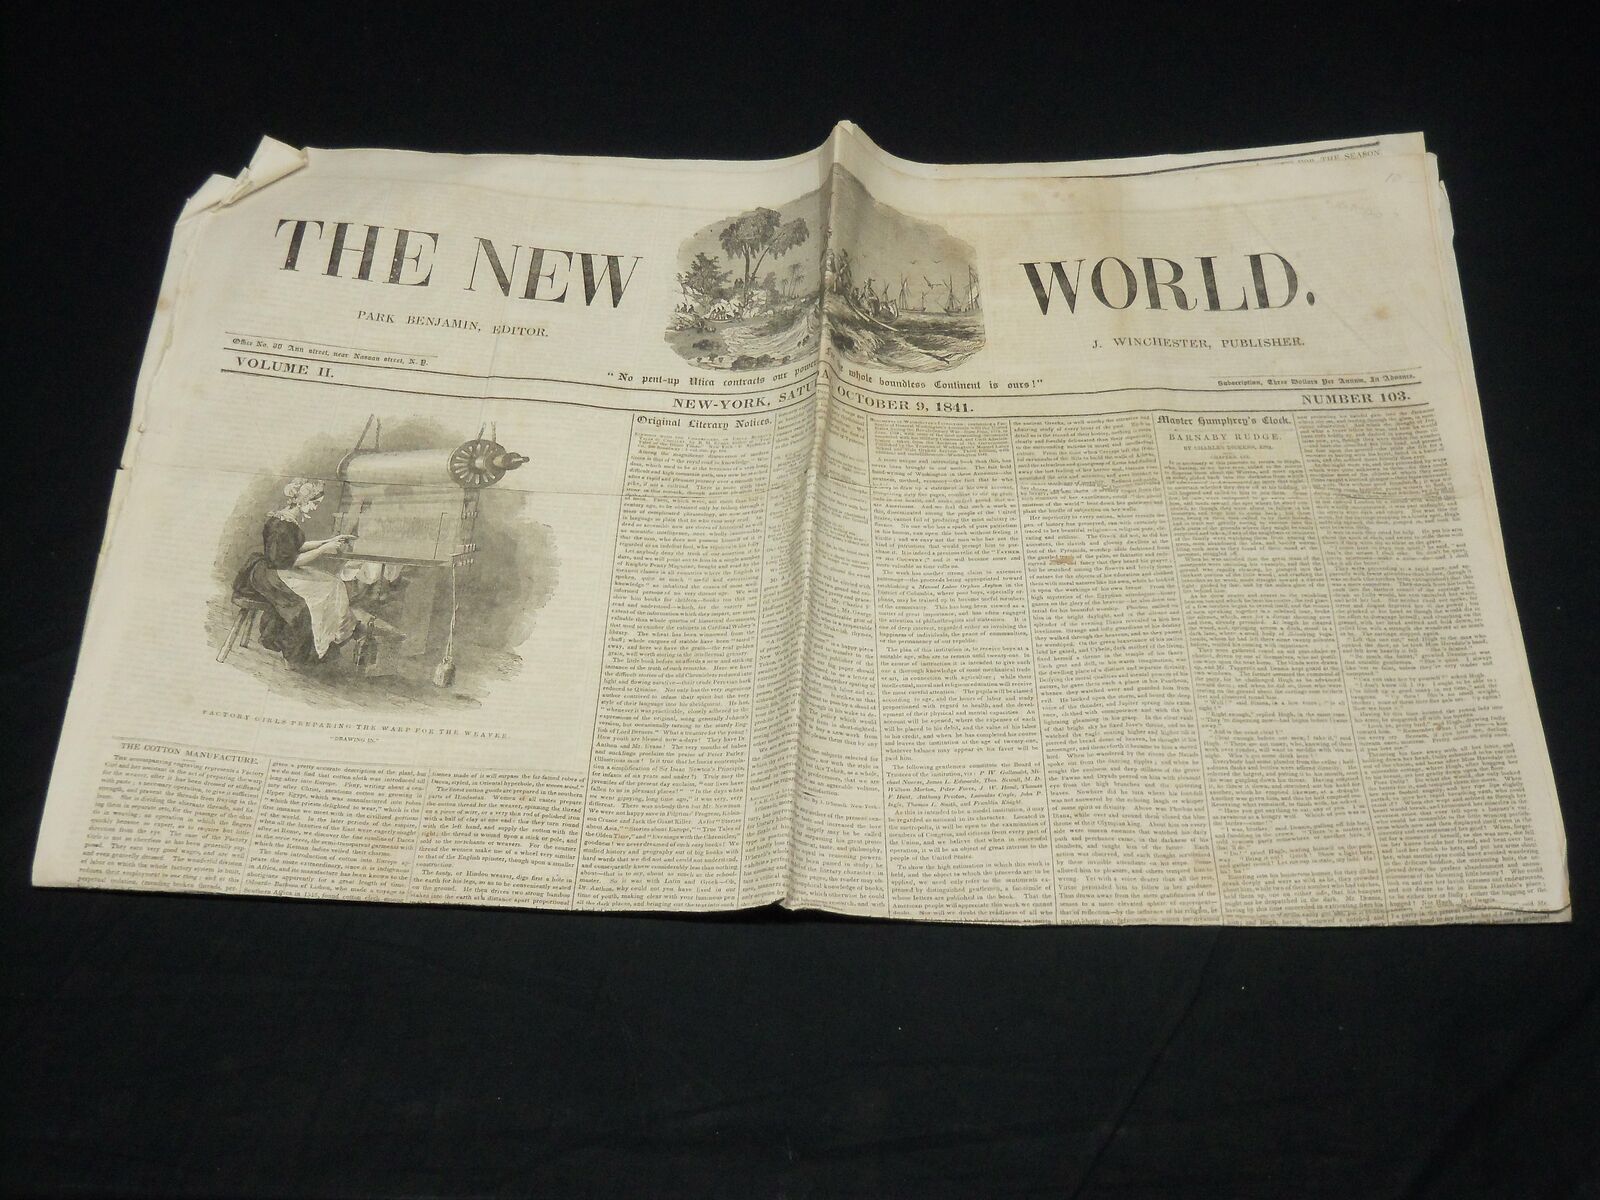 1841 OCTOBER 9 THE NEW WORLD NEWSPAPER -CHARLES DICKENS -BARNABY RUDGE - NP 4844